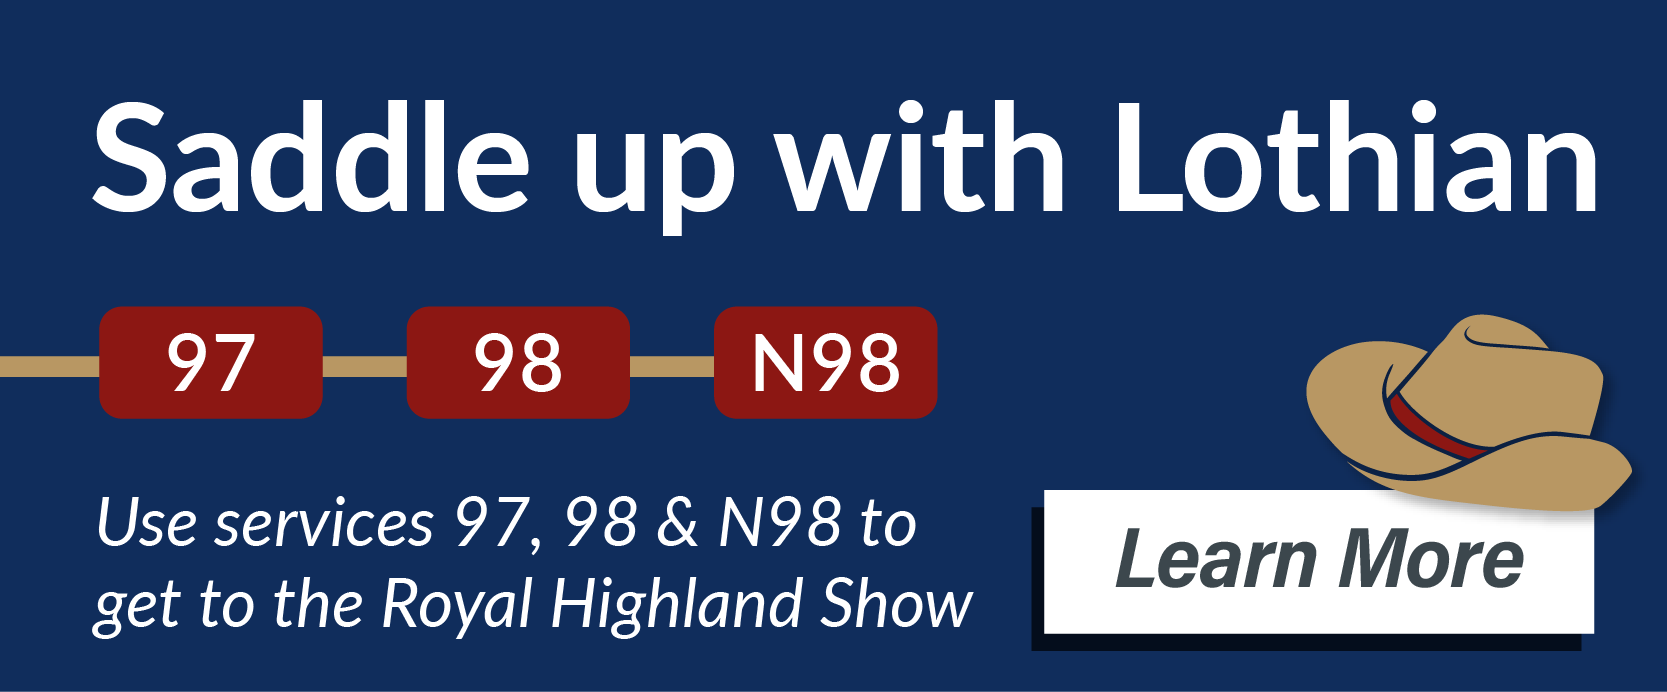 Saddle up with Lothian. Use services 97, 98 * N98 to get to the Royal Highland Show this year.